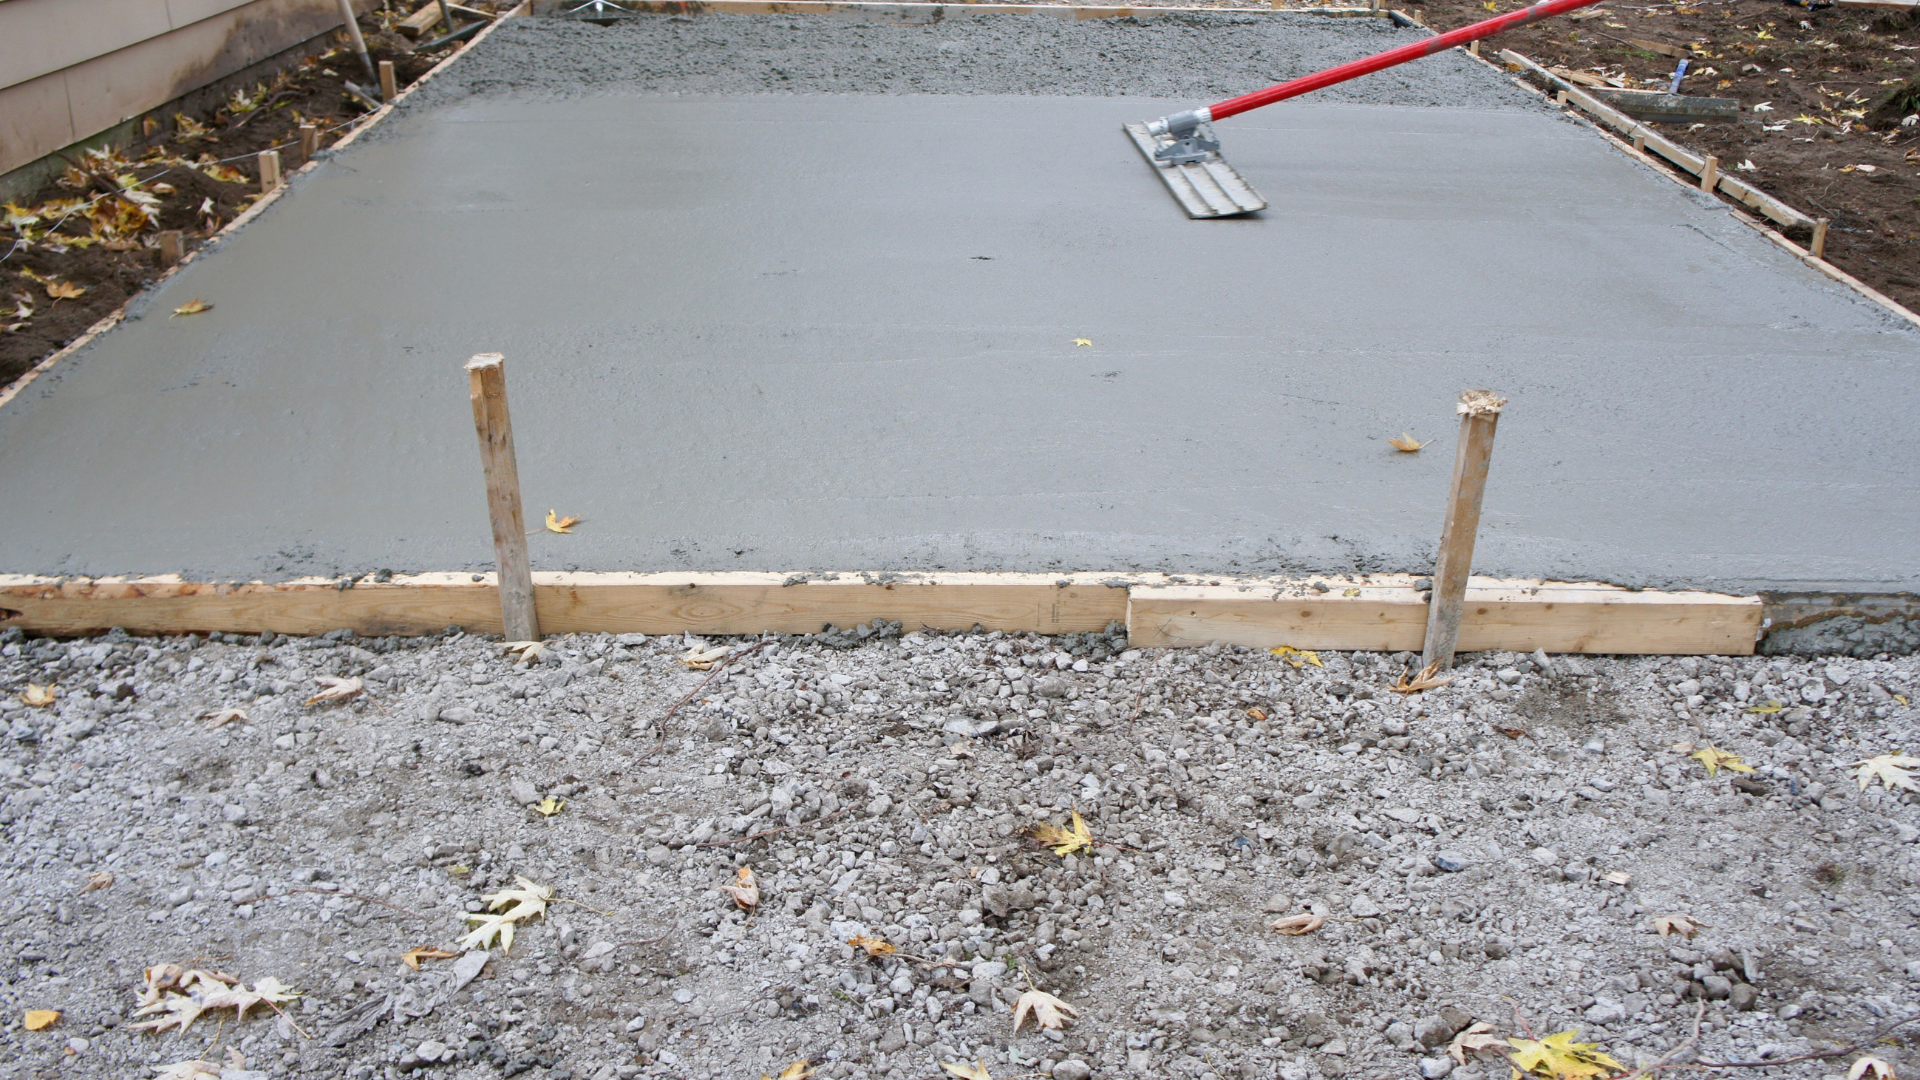 freshly poured concrete for a driveway being leveled